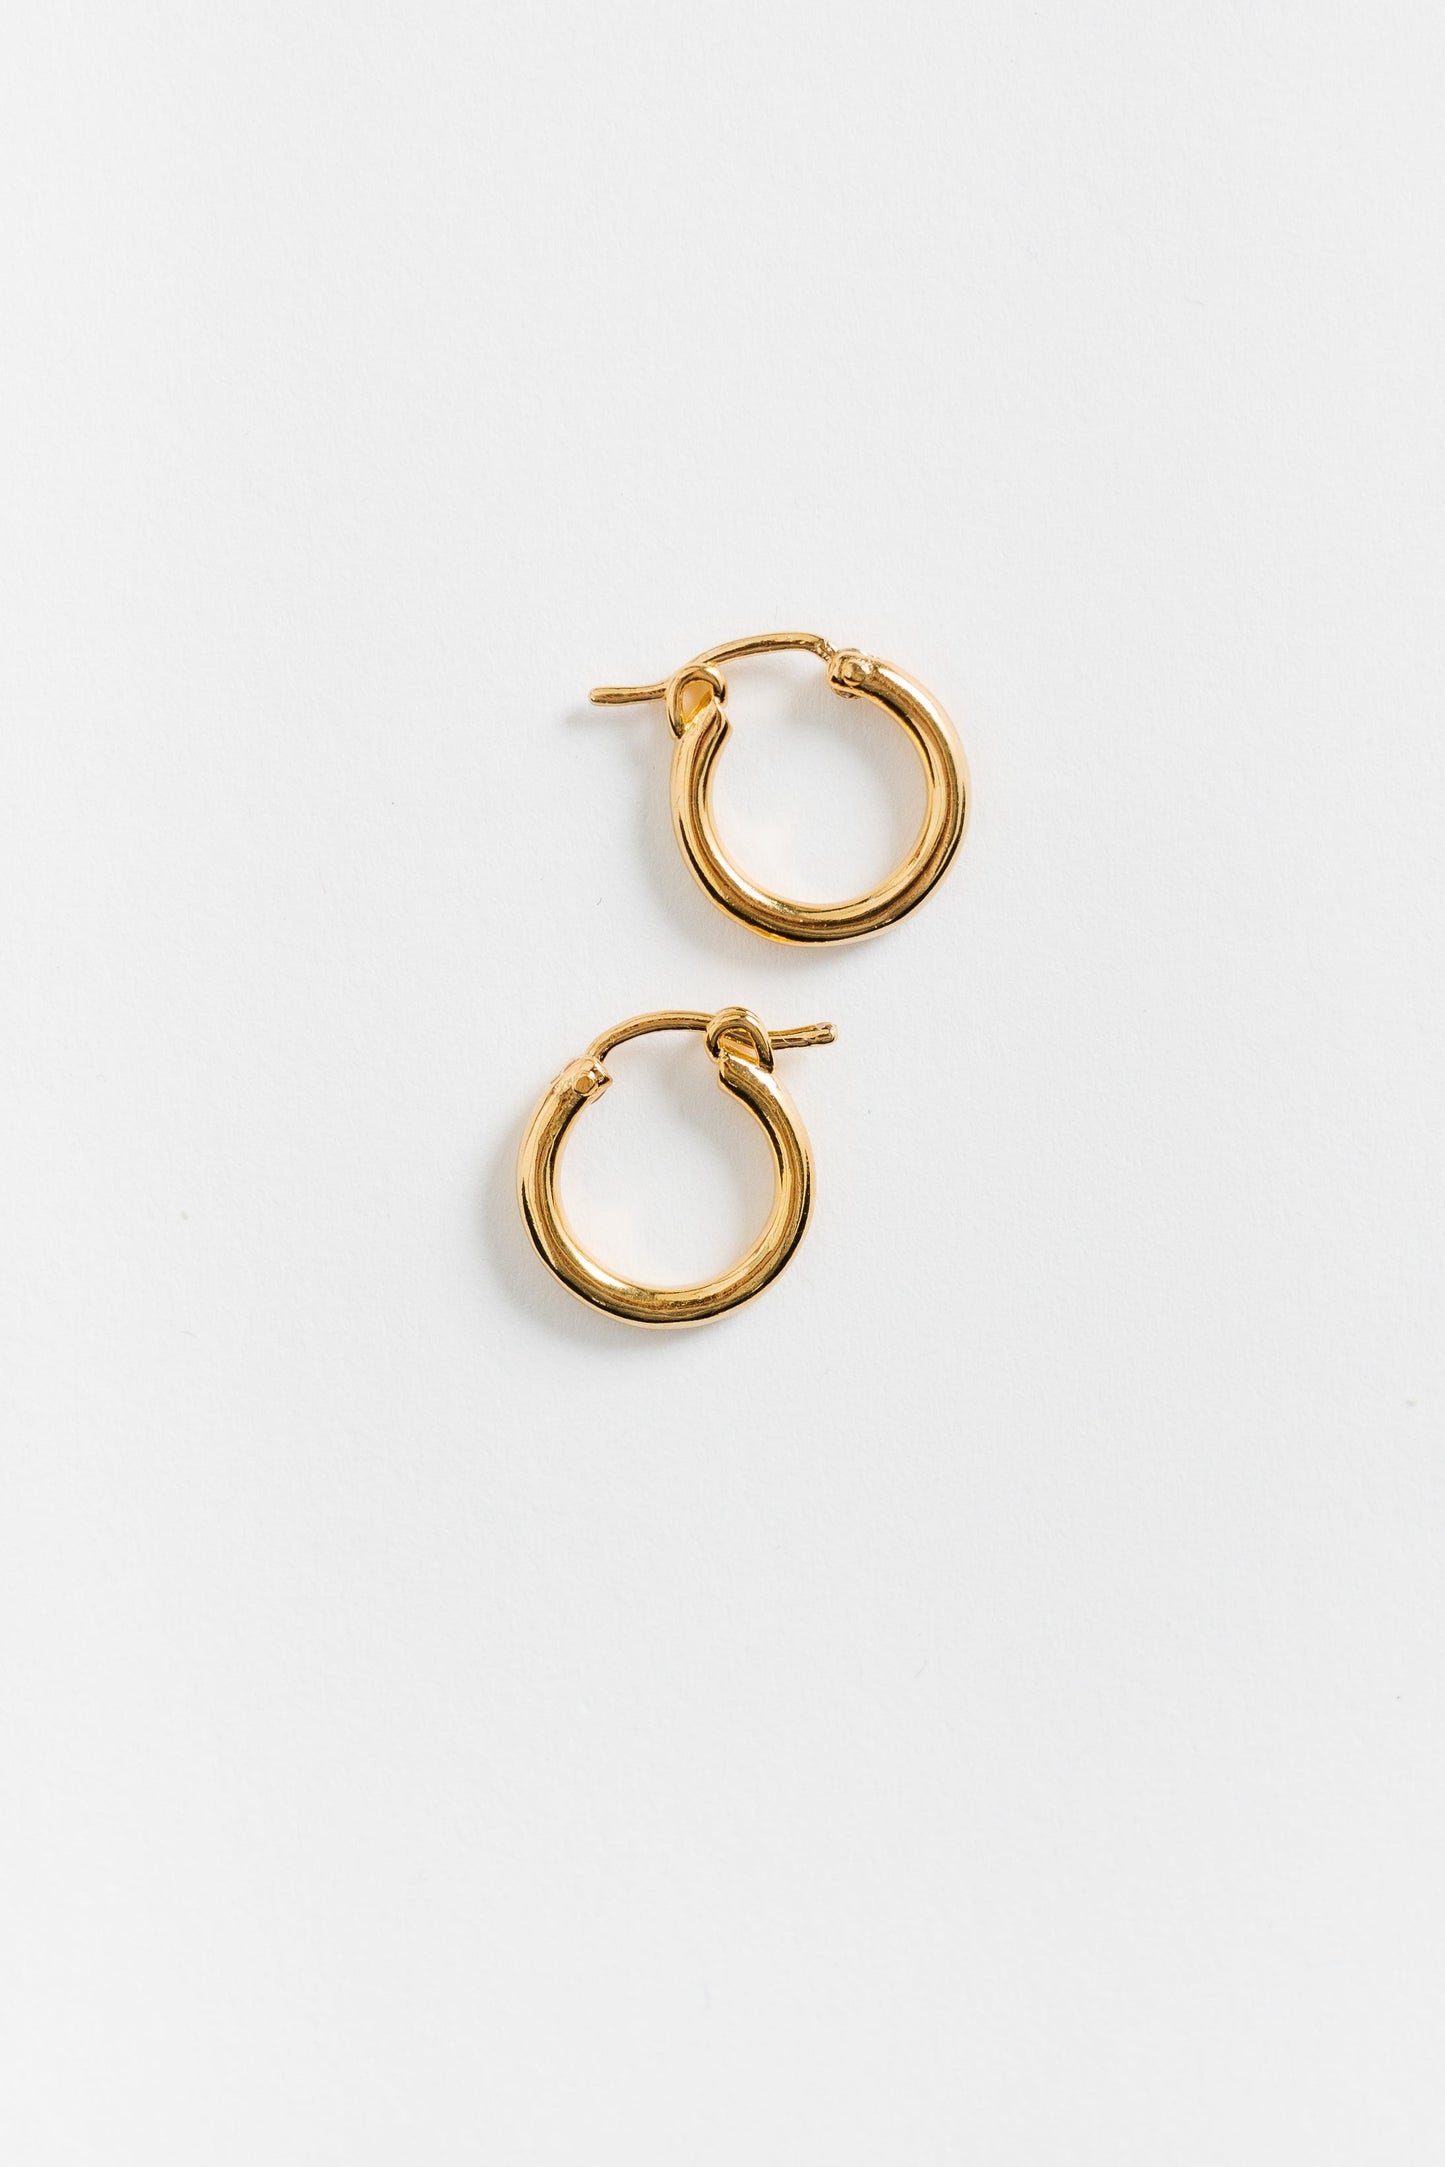 Cove Jet Set Hoops WOMEN'S EARINGS Cove Accessories Gold 13mm 